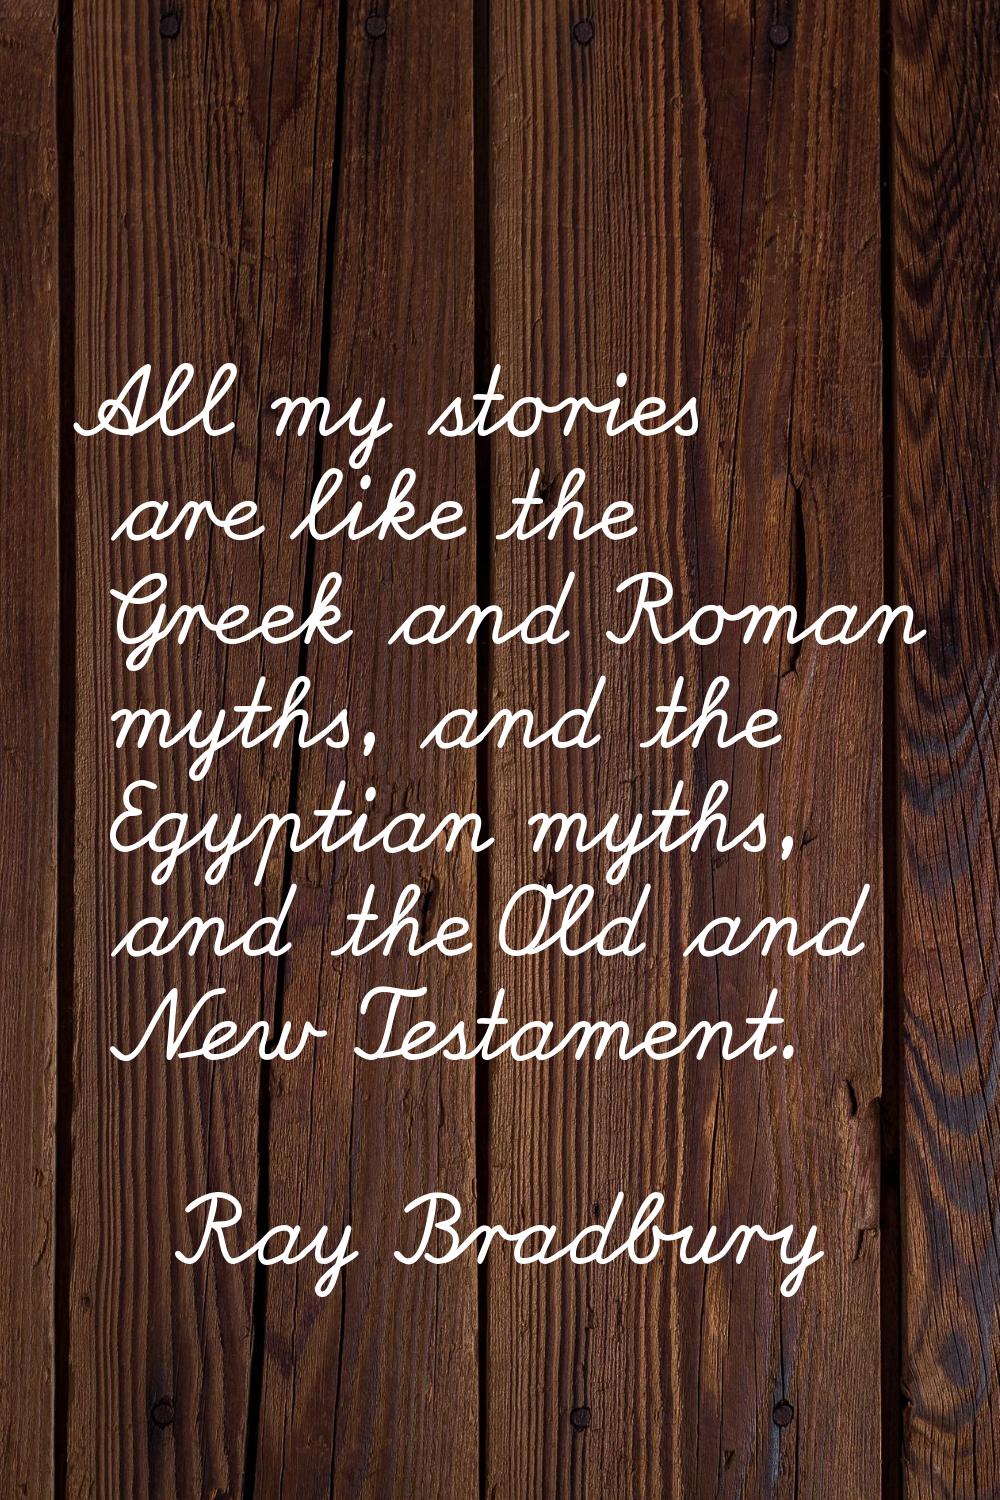 All my stories are like the Greek and Roman myths, and the Egyptian myths, and the Old and New Test